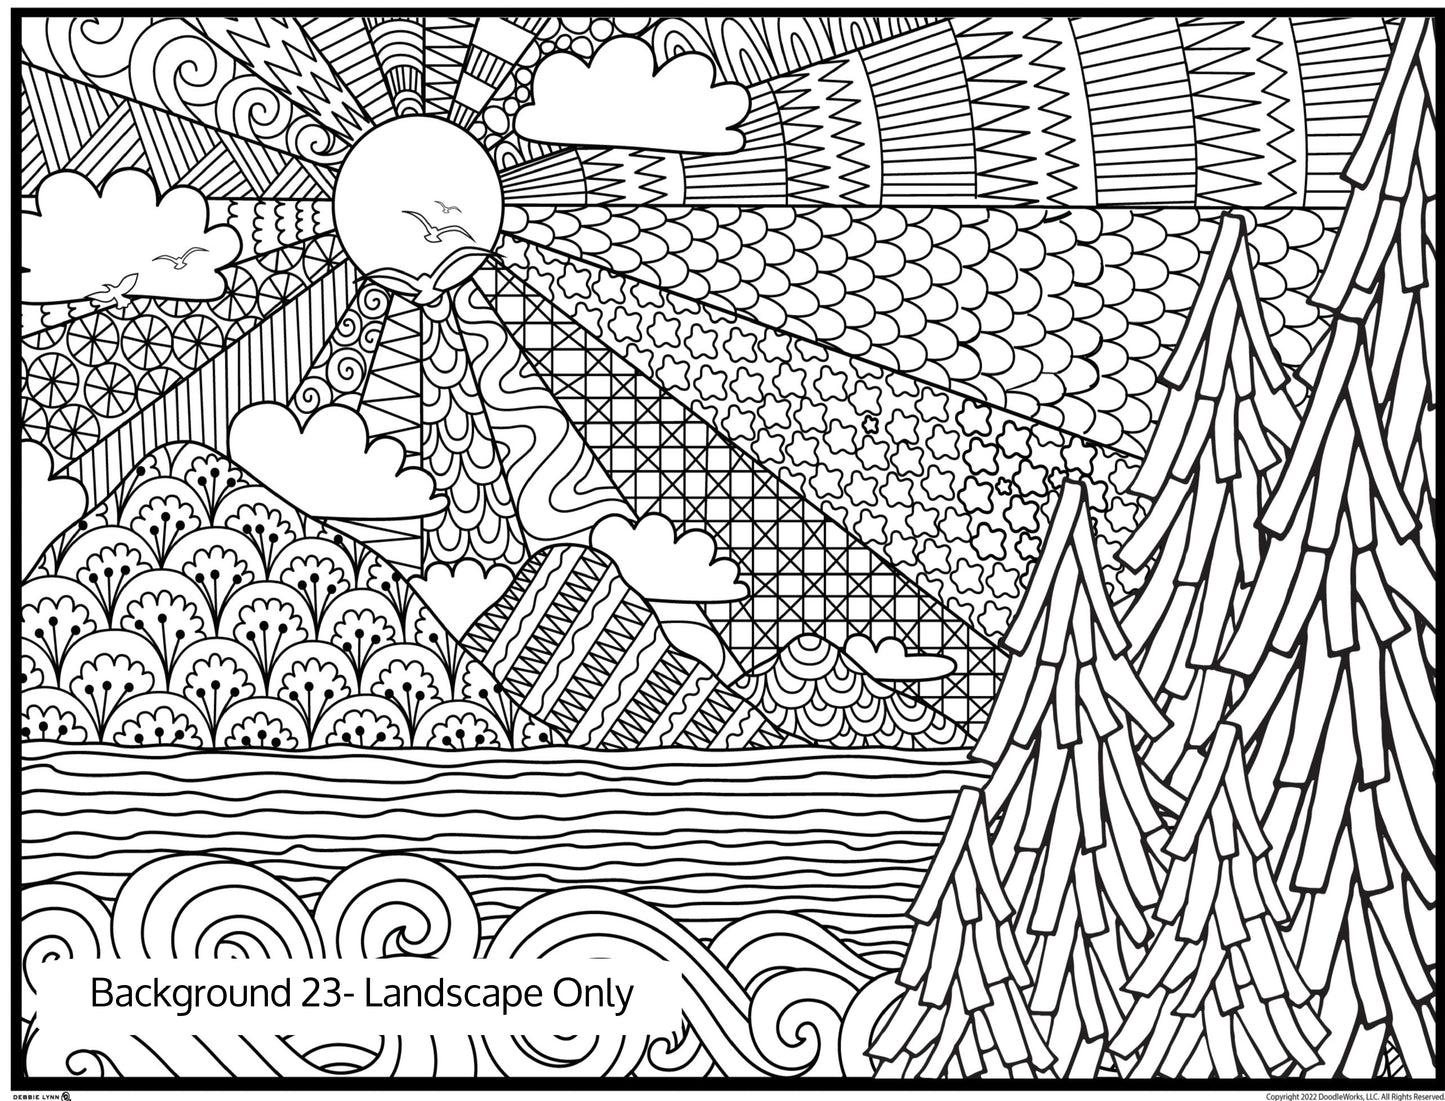 Background 23 Custom Personalized Giant Coloring Poster 46"x60"